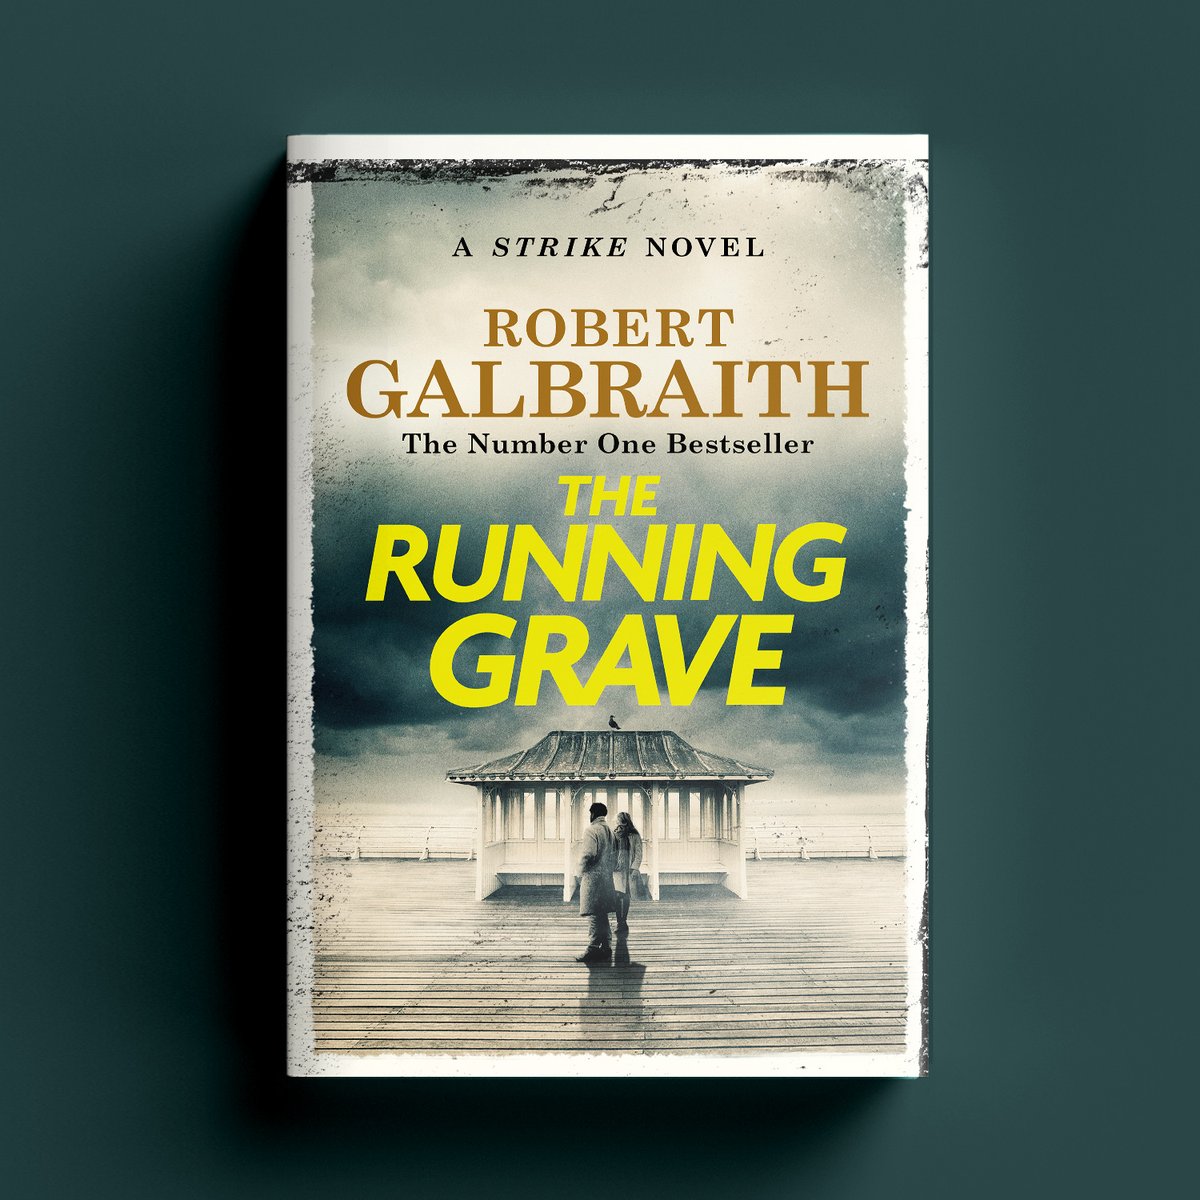 What is your favourite element of The Running Grave cover? Explore the cover here: brnw.ch/21wC5yd #TheRunningGrave #RobertGalbraith